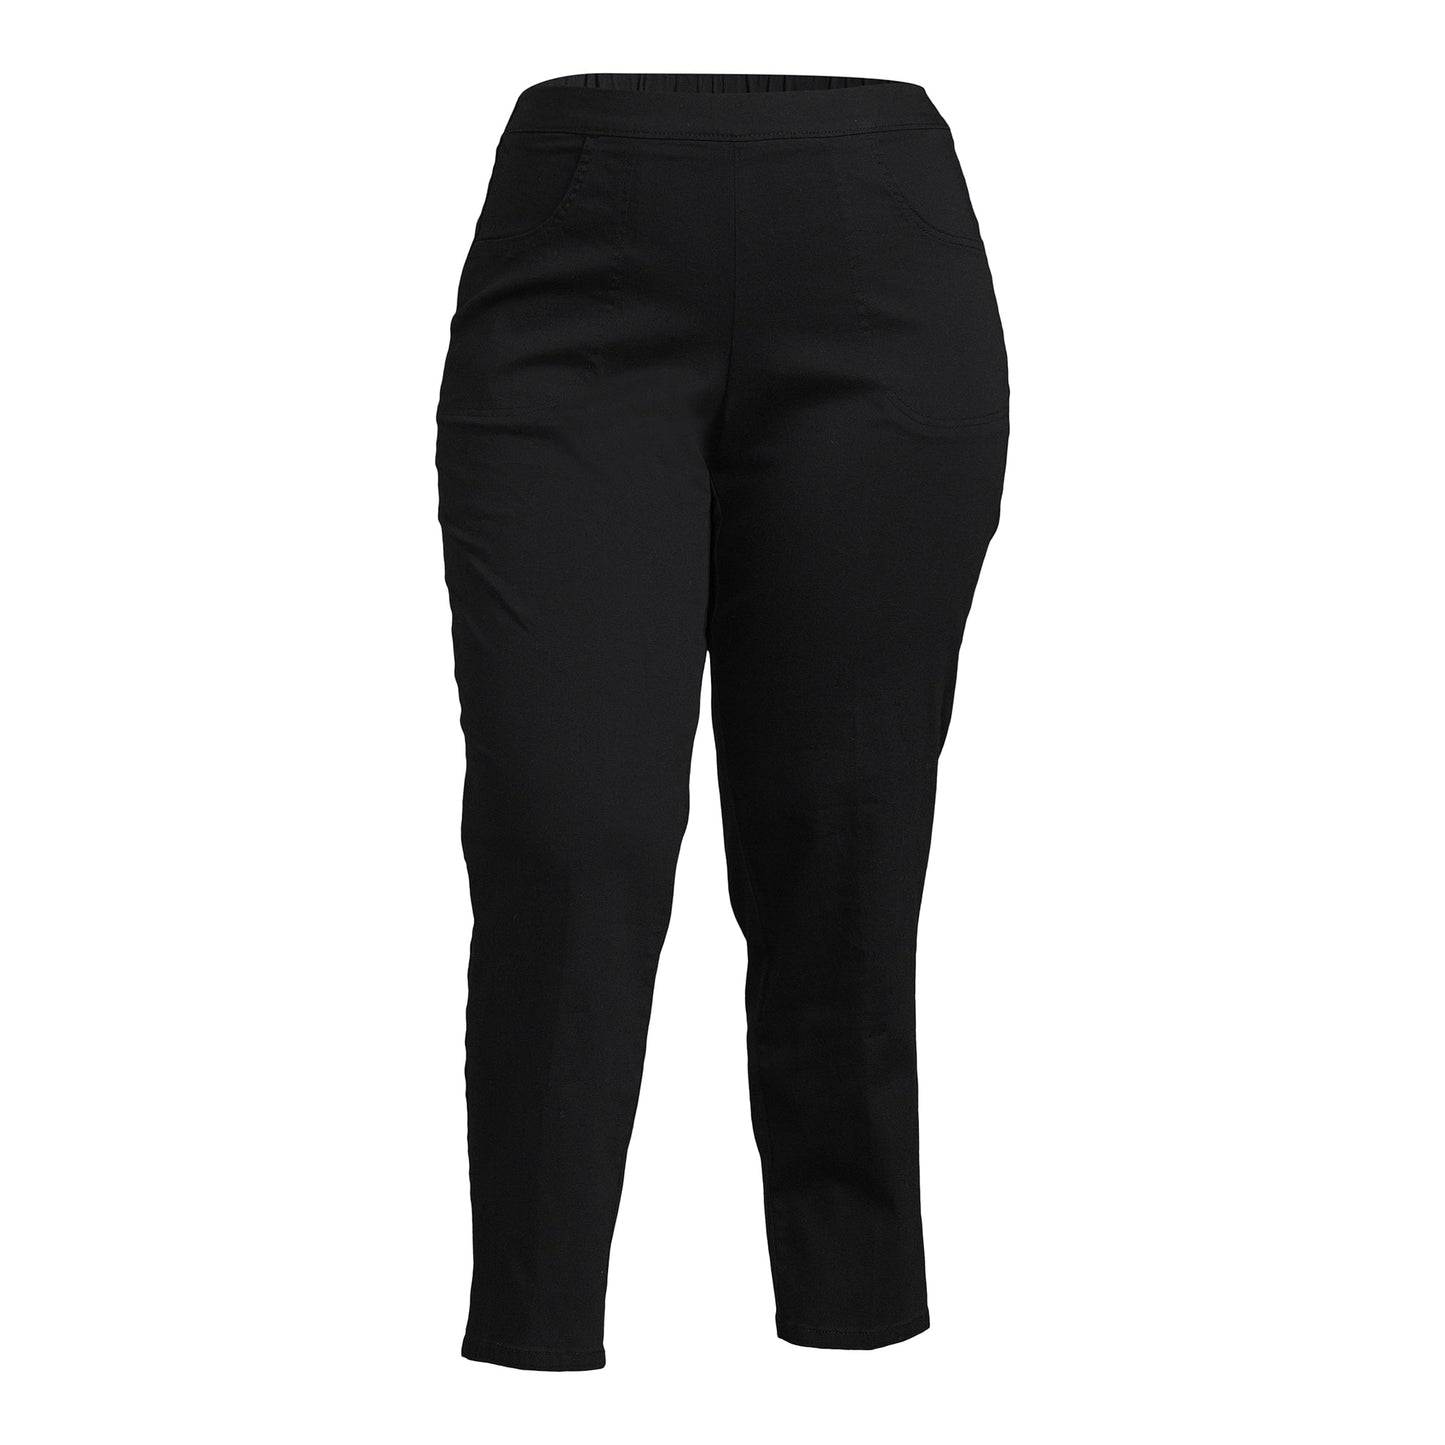 Just My Size Womens Plus Size Pull on 2-Pocket Stretch Woven Pants,